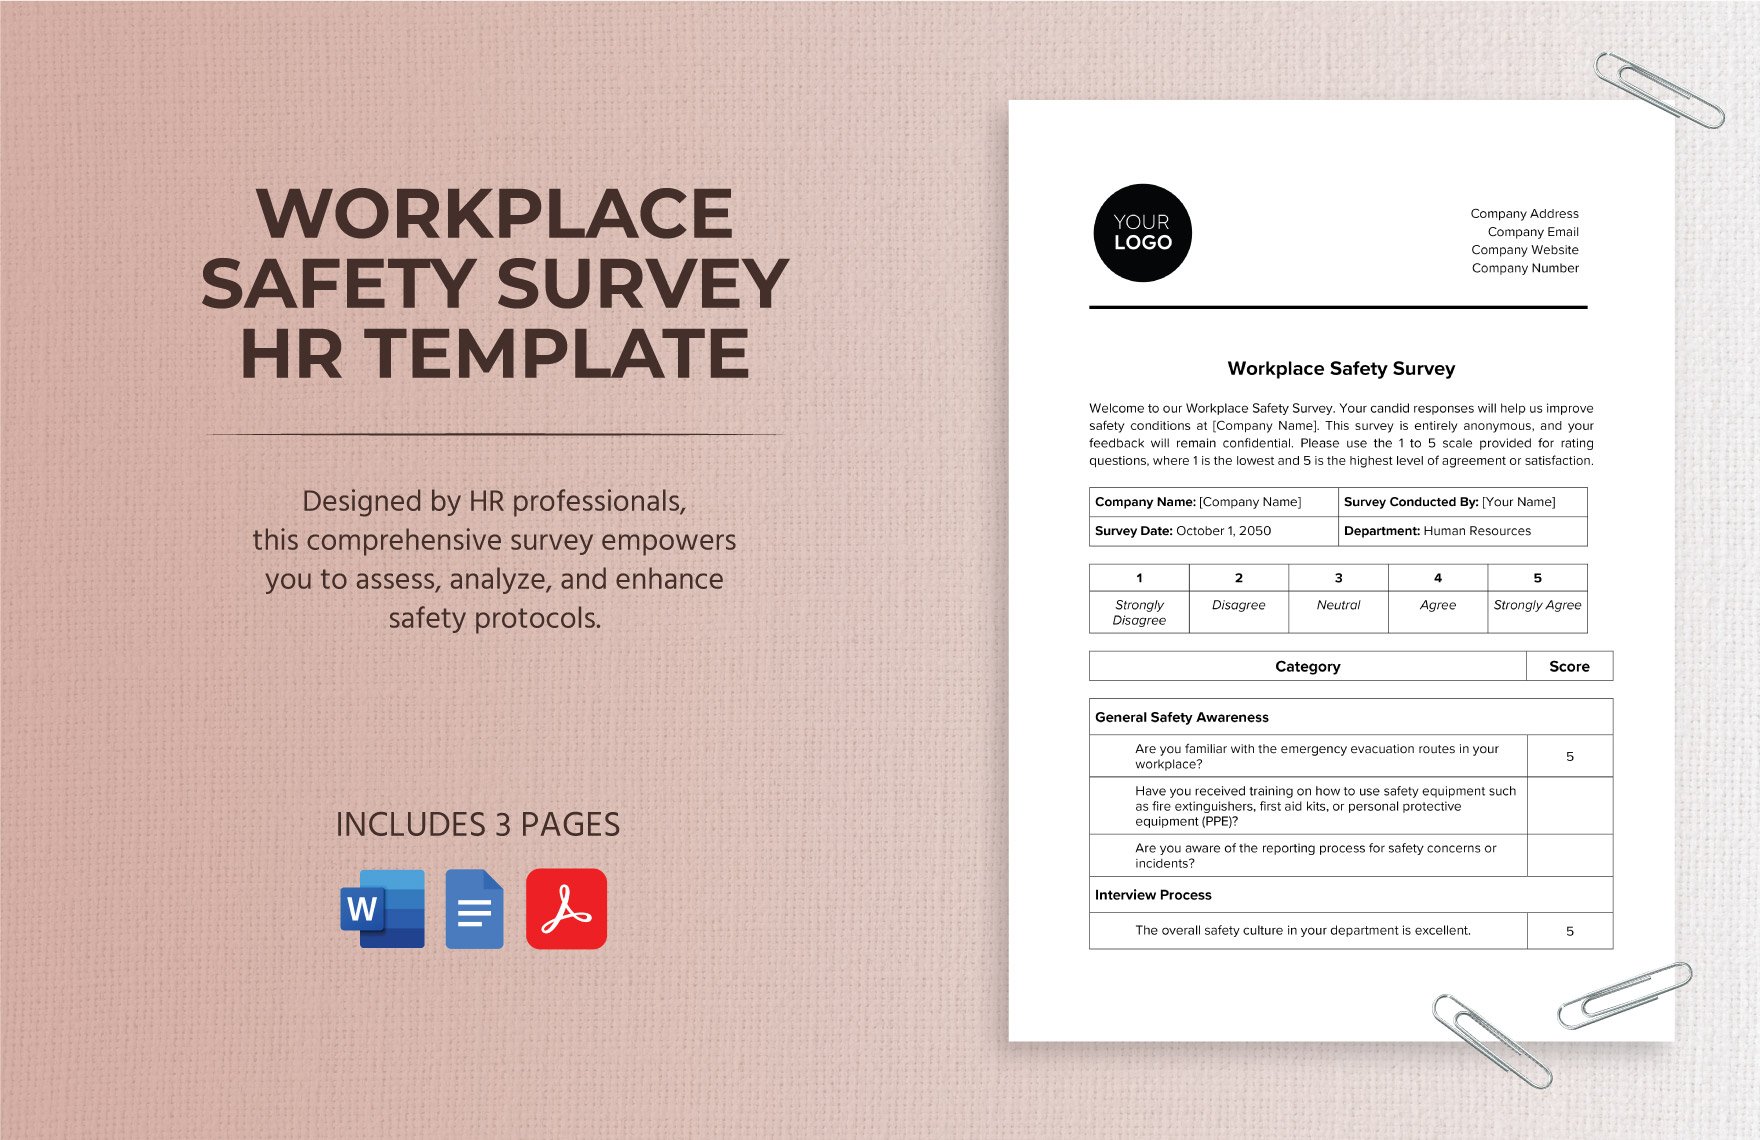 Workplace Safety Survey HR Template